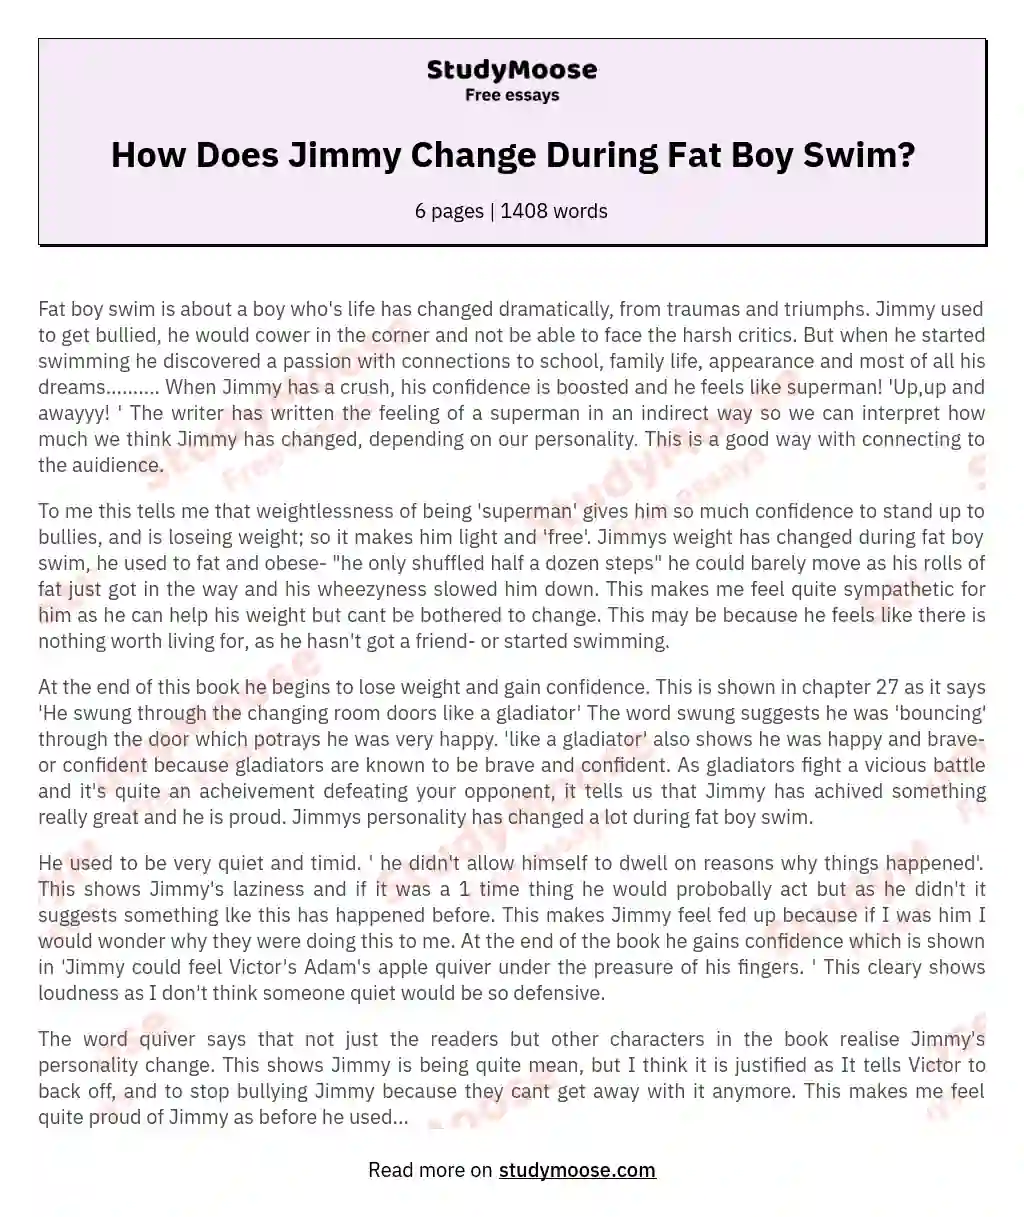 How Does Jimmy Change During Fat Boy Swim? essay